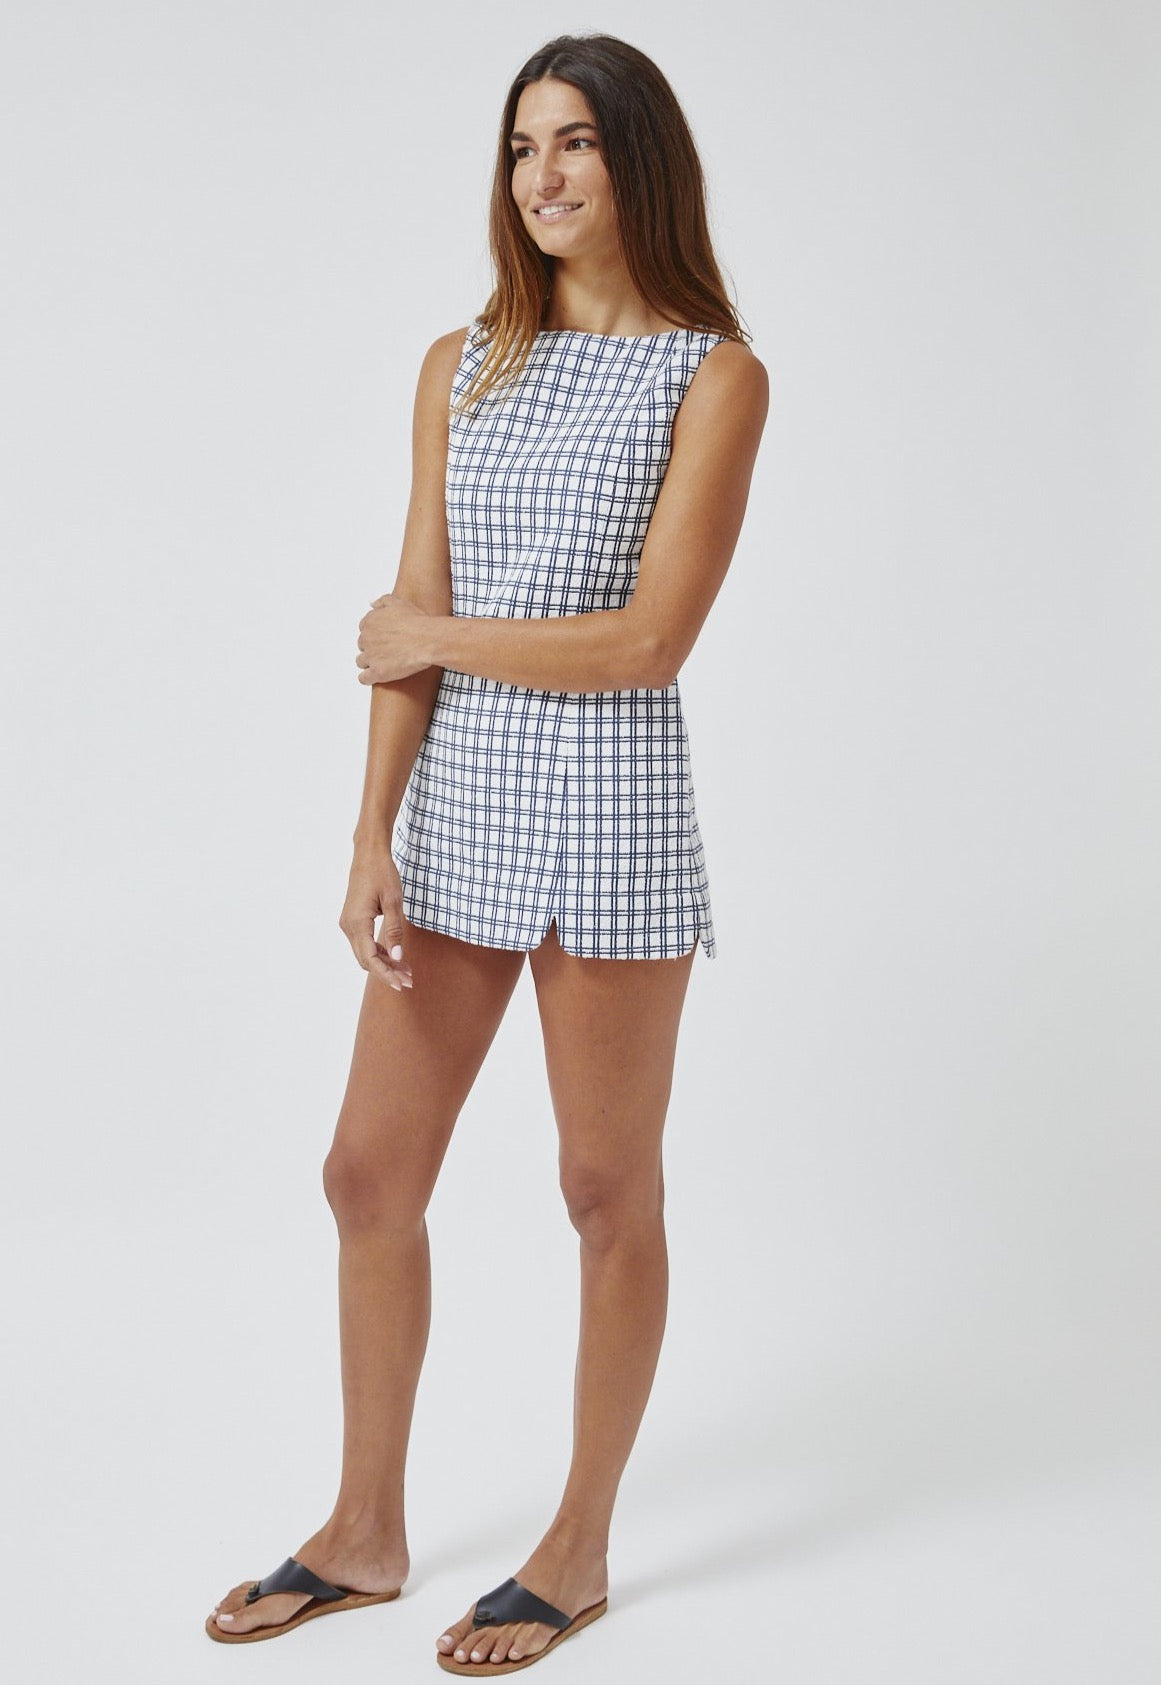 THE SCALLOP MINI DRESS w/shorts in NAVY CHECK BOUCLE COTTON